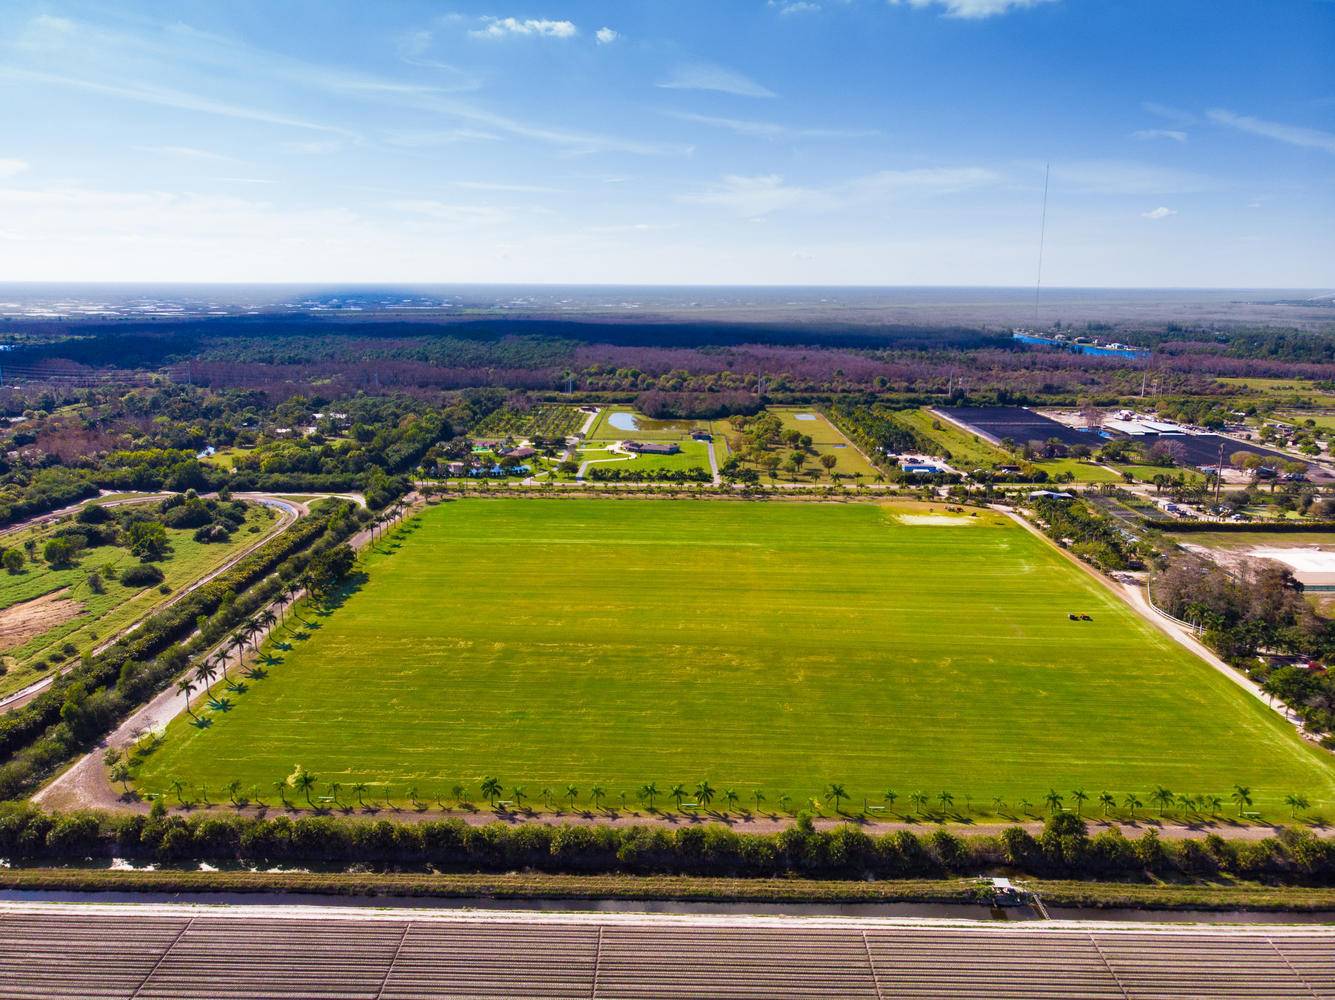 Great opportunity to purchase 40 acres to enjoy pure polo or create an Equestrian Estate.